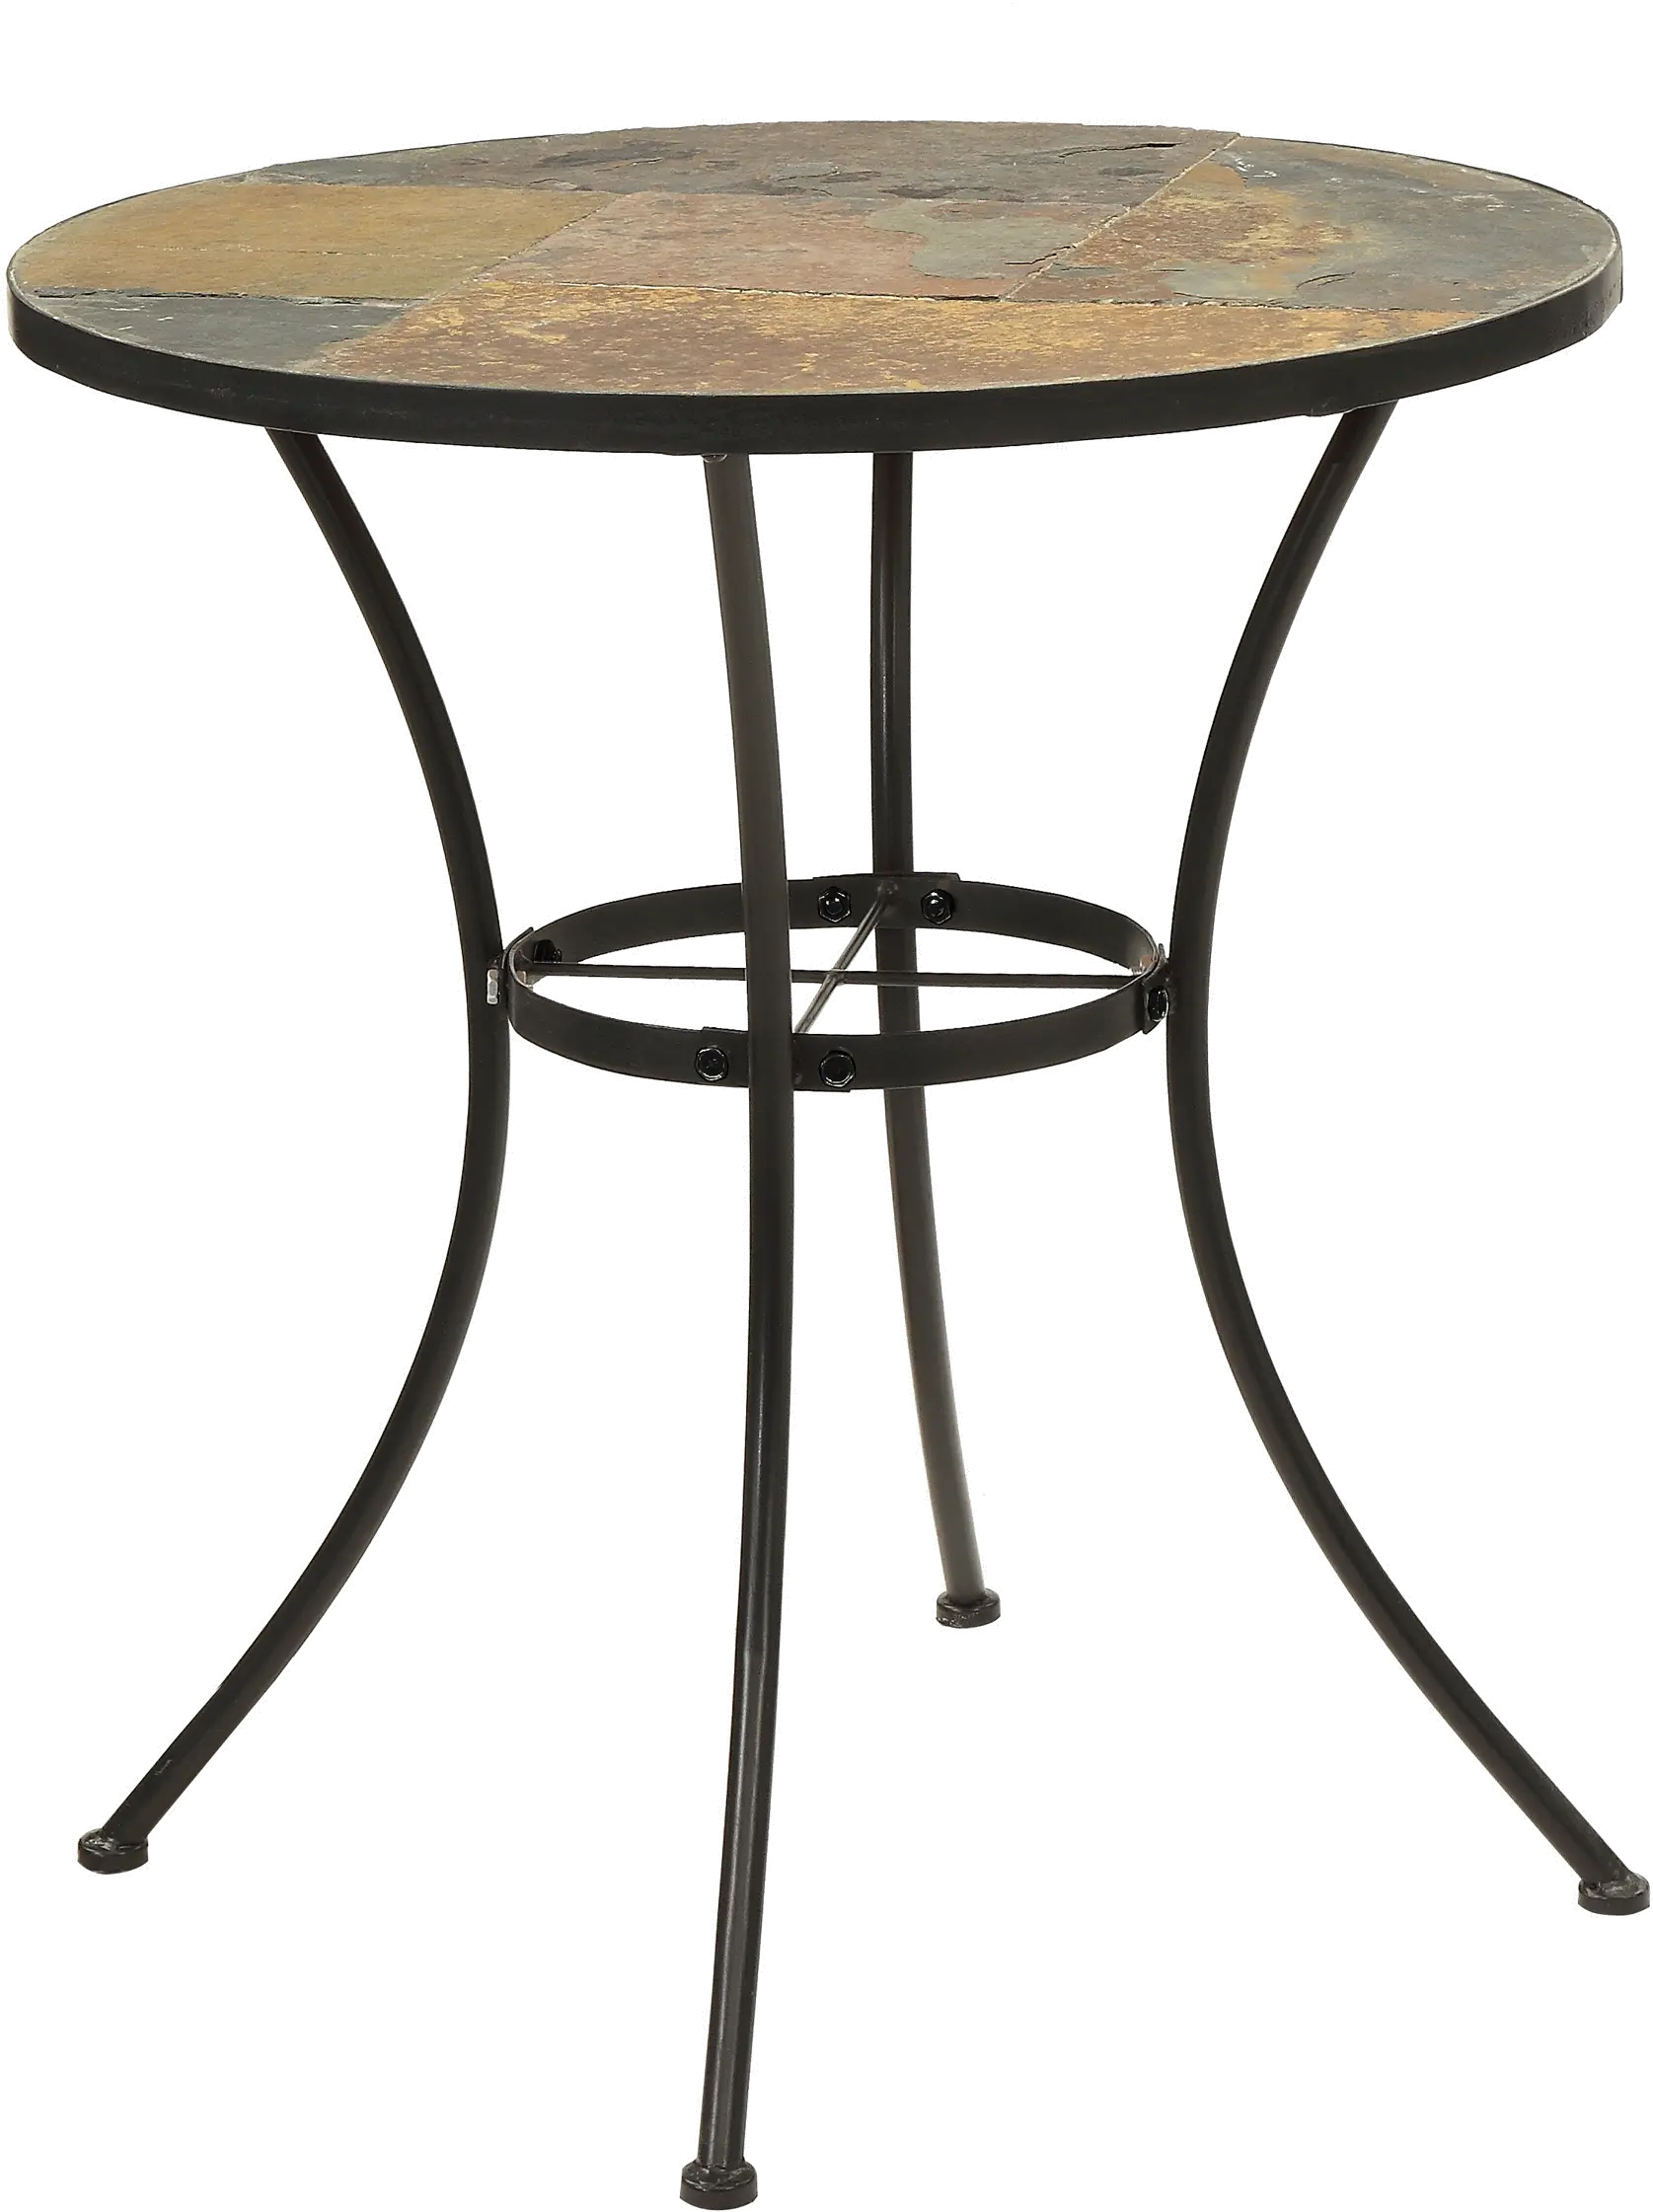 Photos - Garden Furniture 4D Concepts Round Bistro Table with Slate Top - Stone 601611